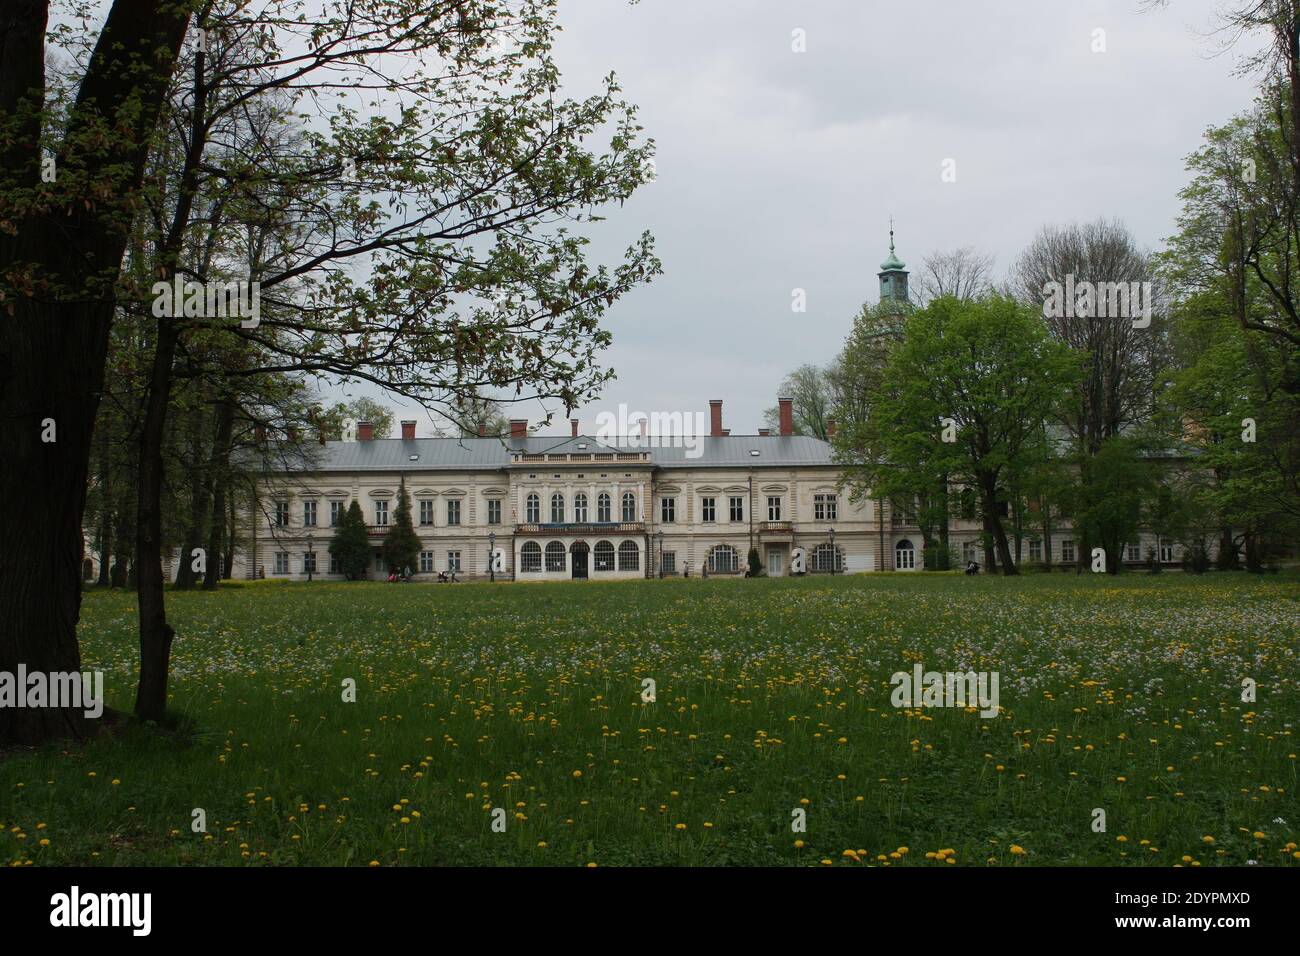 Habsburg Castle in Zywiec, residence of the imperial family Habsburgs, at present public property, Poland Stock Photo